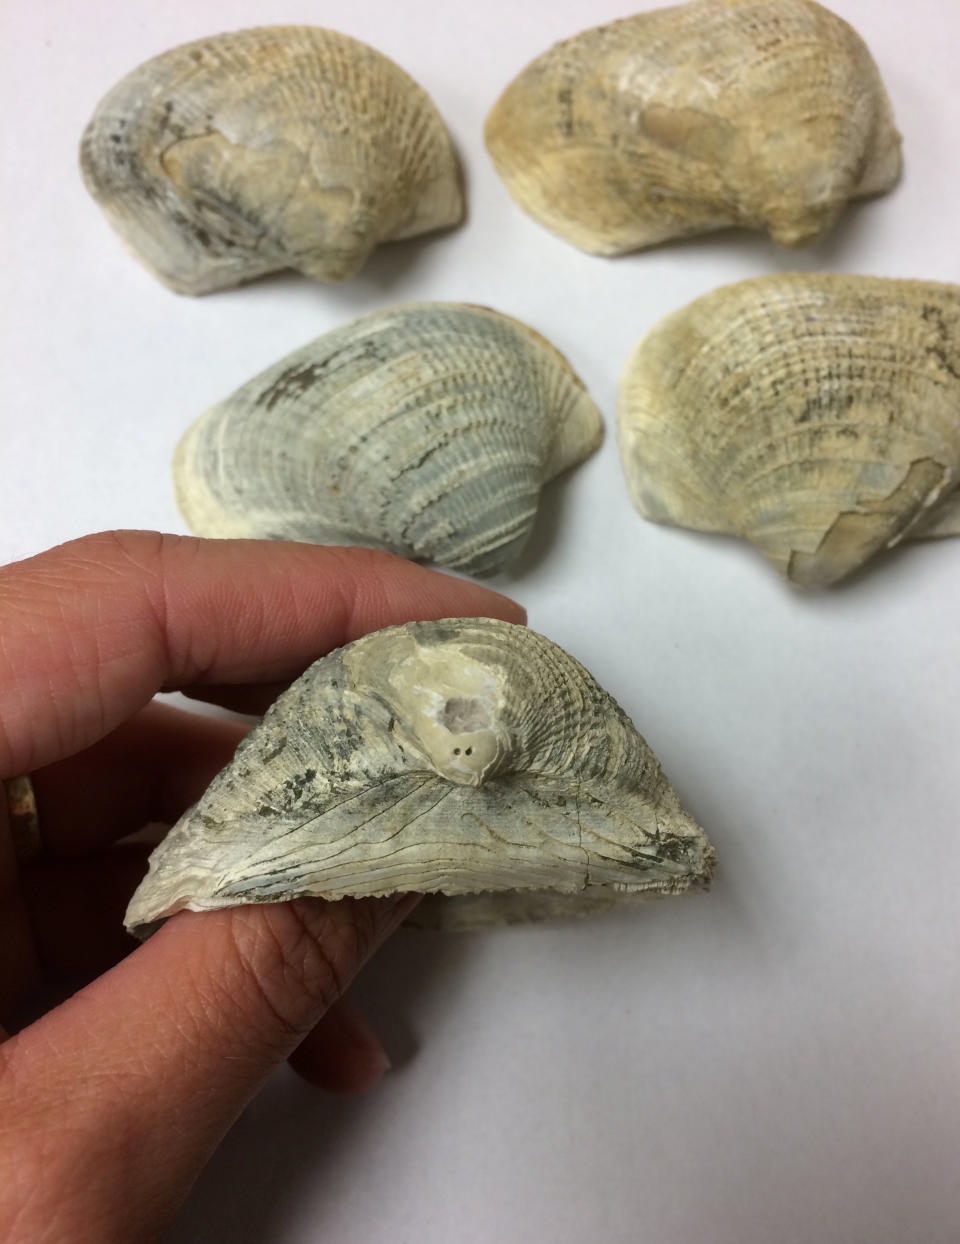 The scientists analysed the fossilised shells collected from around the world (Picture: SWNS)